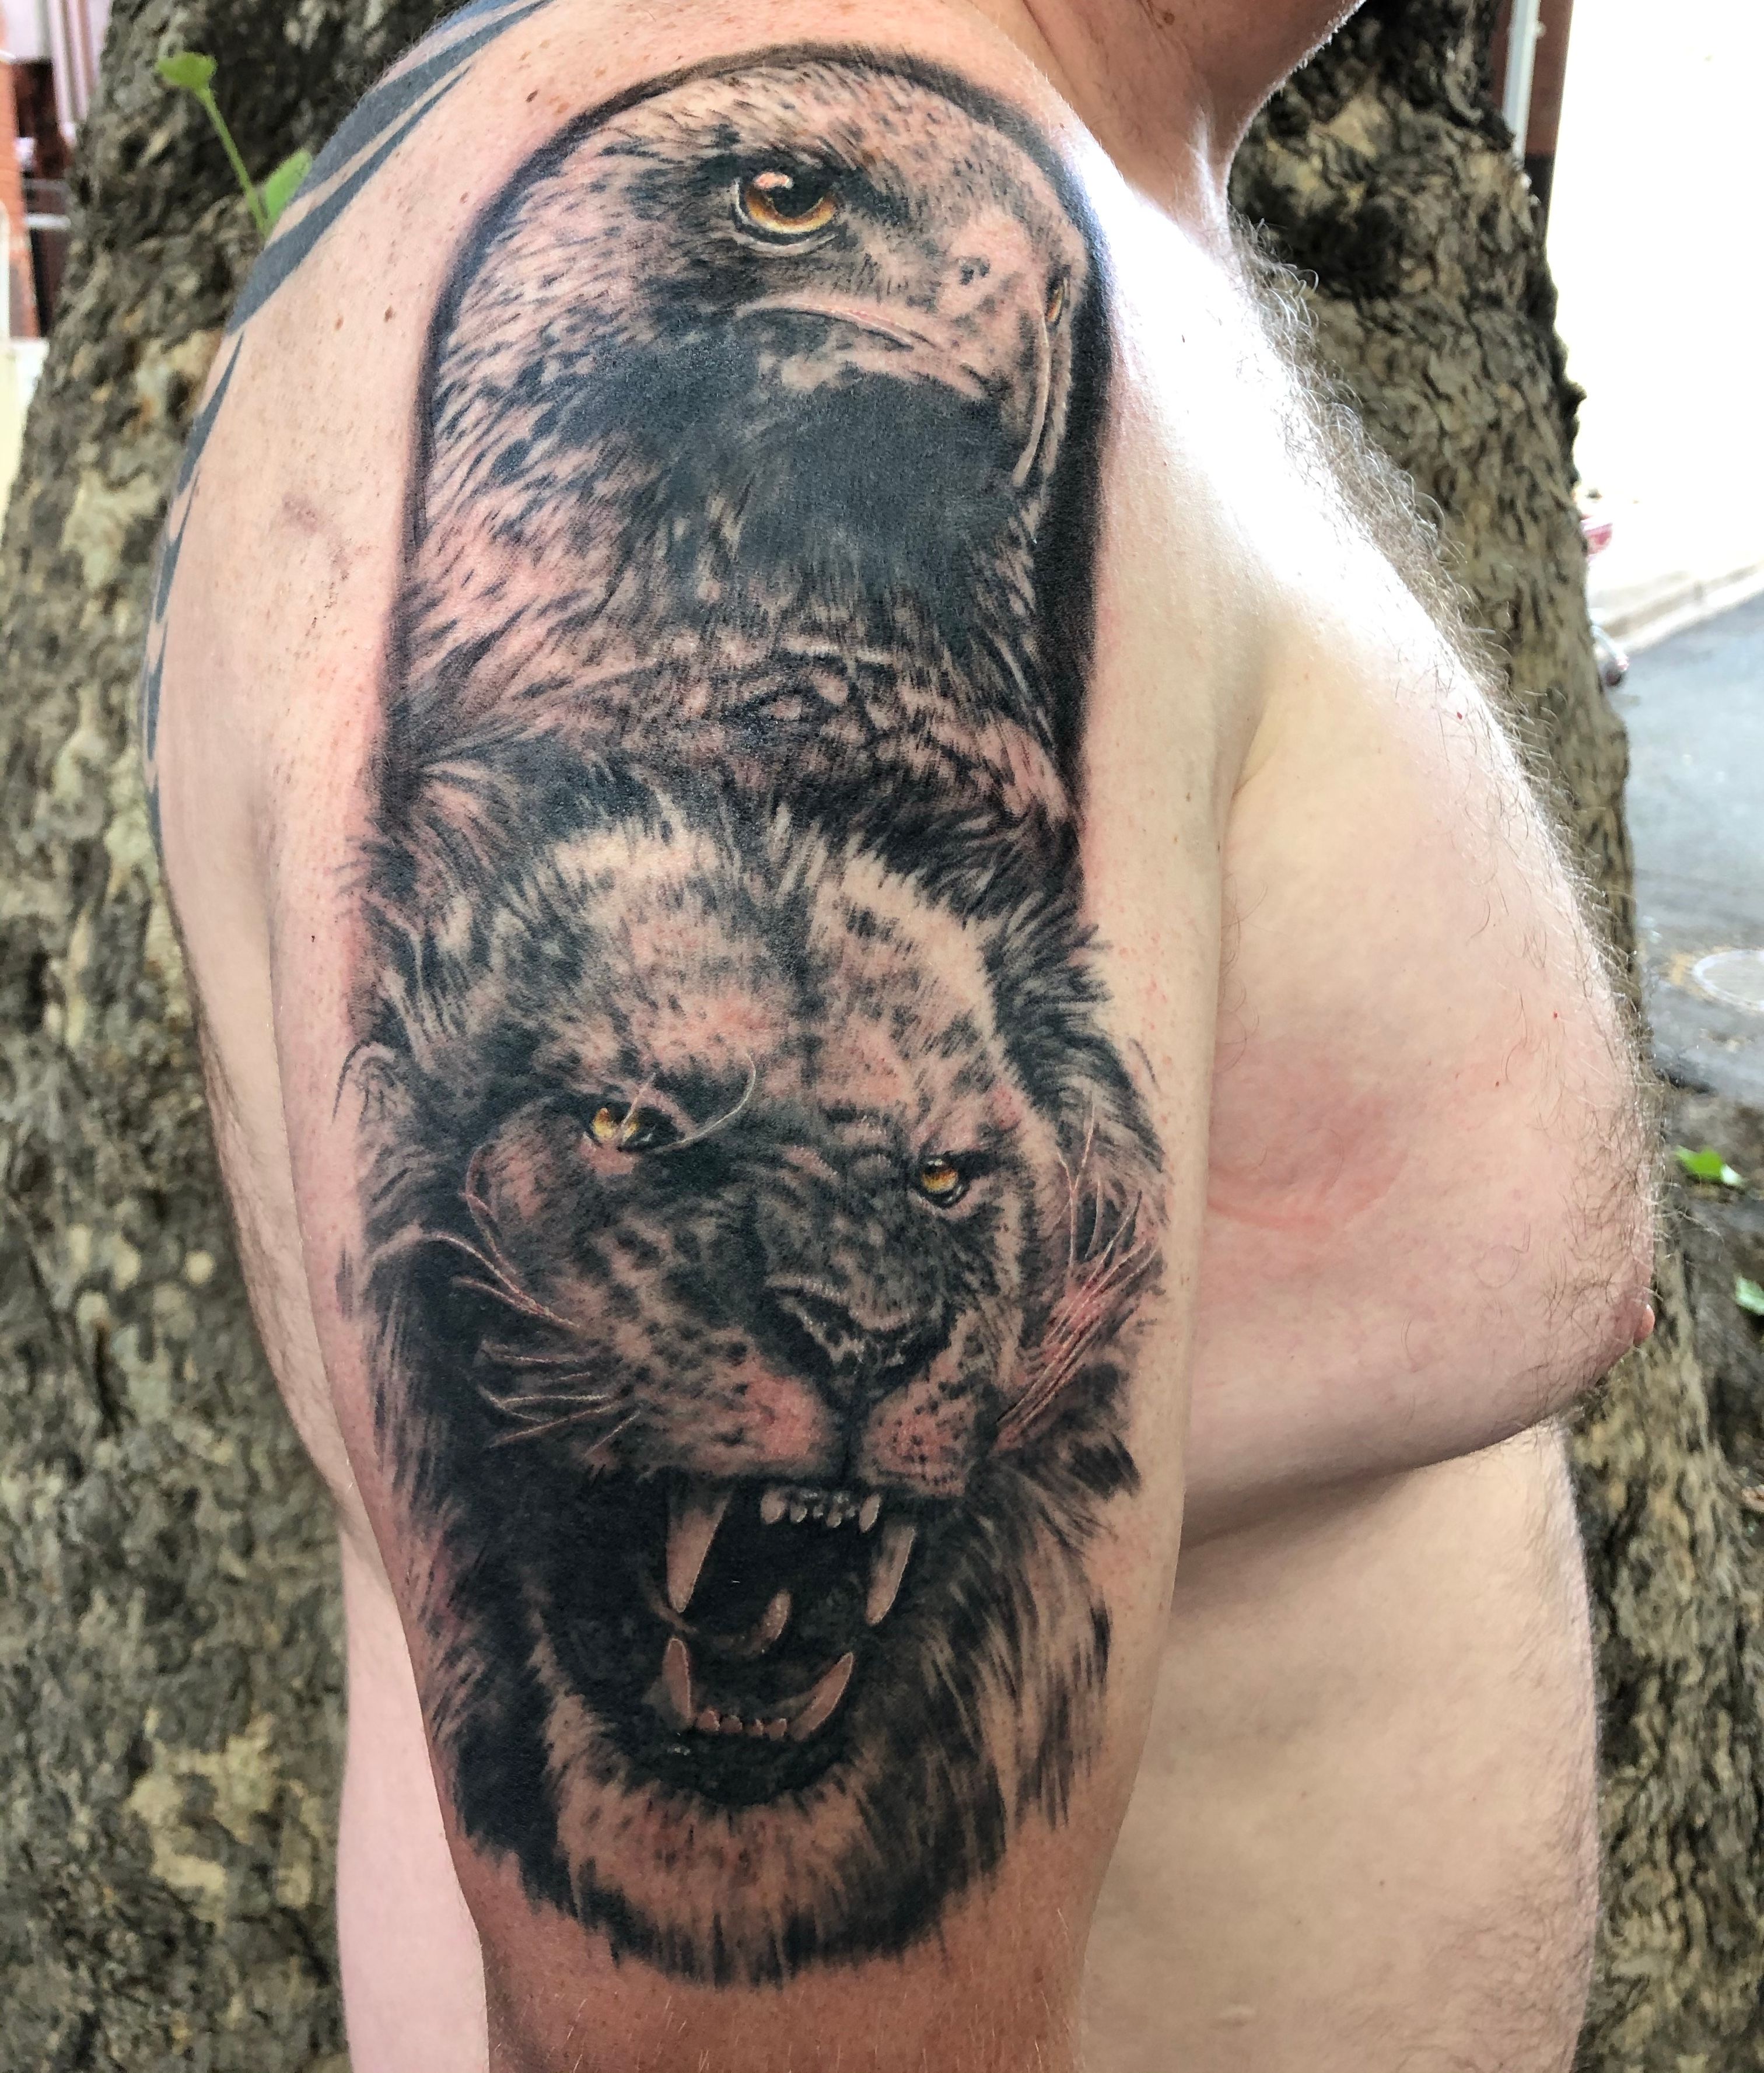 10 Best Lion and Eagle Tattoo Designs  PetPress  Eagle tattoo Mens lion  tattoo Tattoos